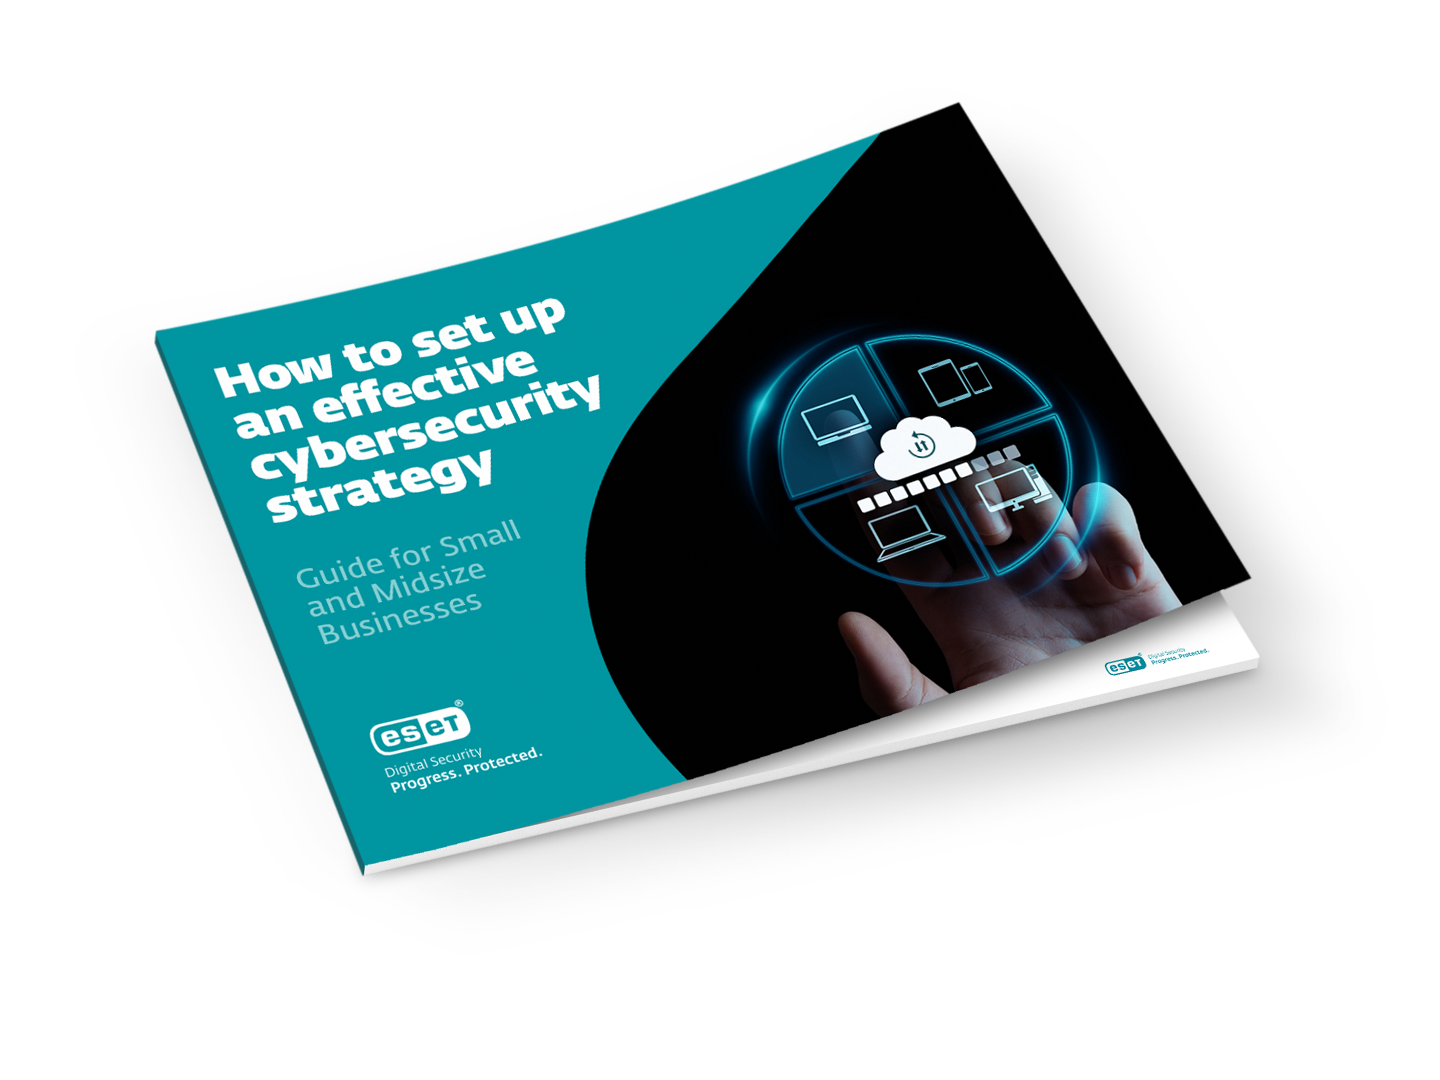 How to set up an effective cyber-security strategy